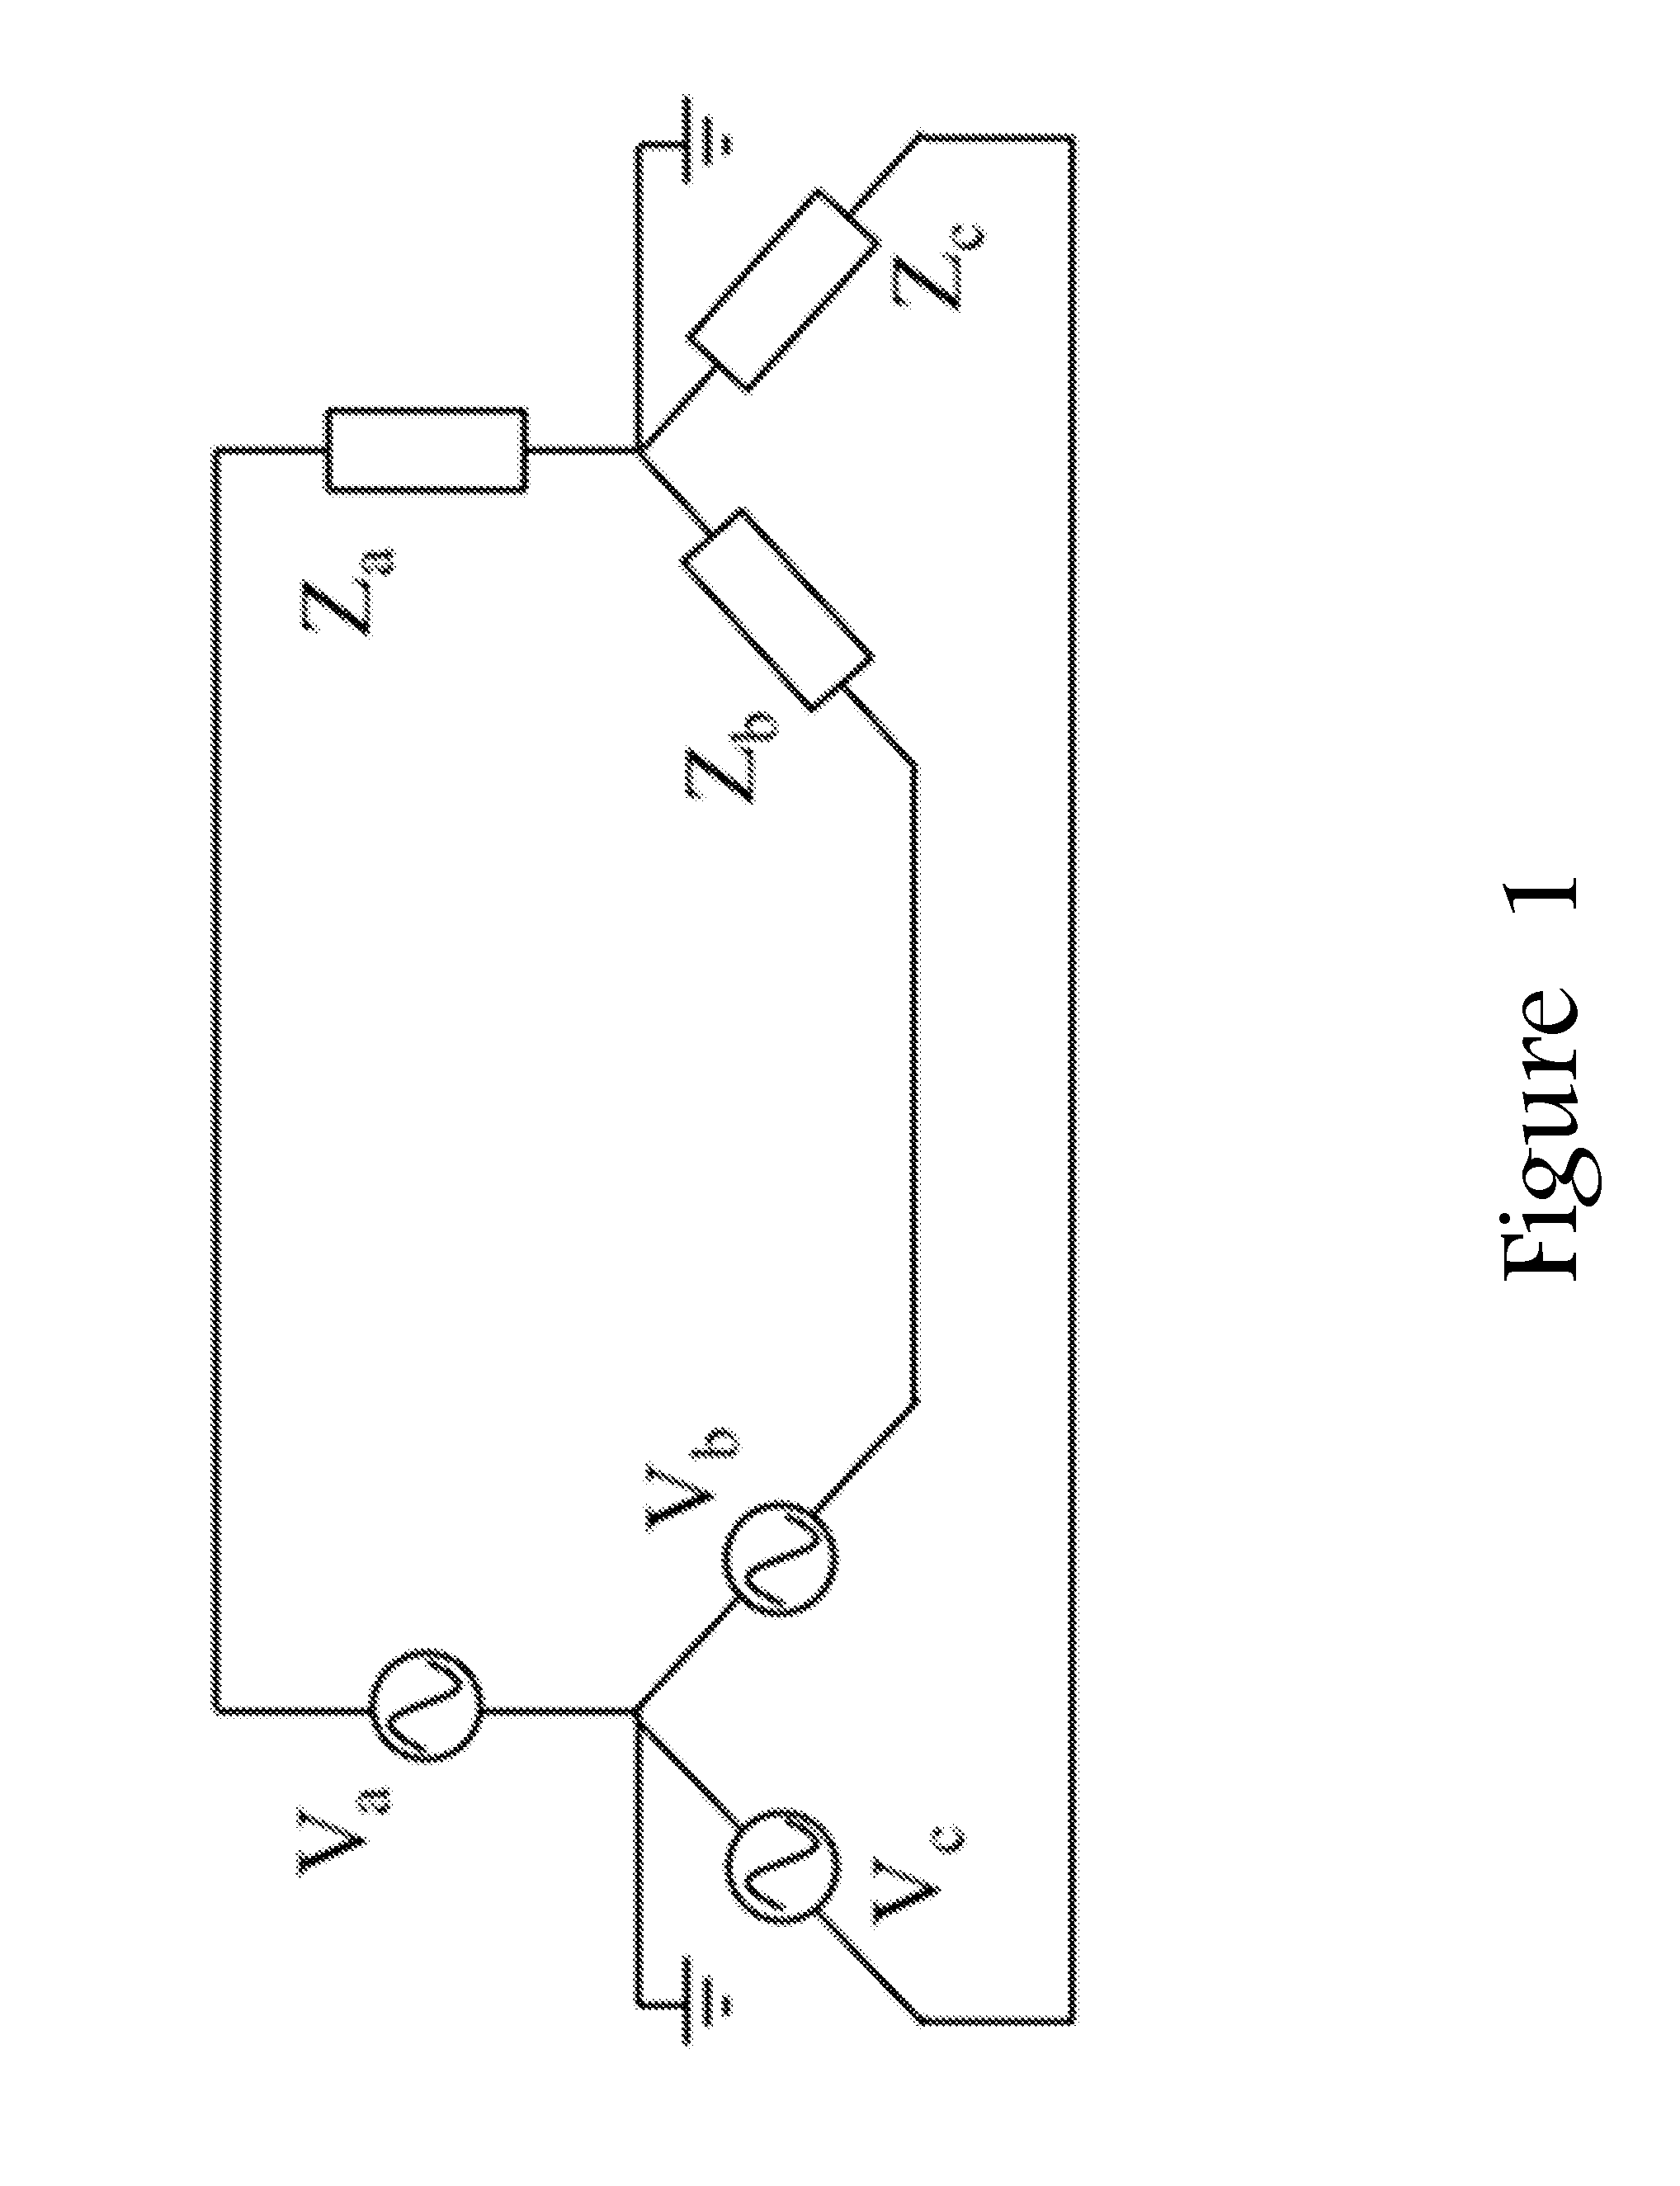 System and method for monitoring and managing three-phase power flows in electrical transmission and distribution networks